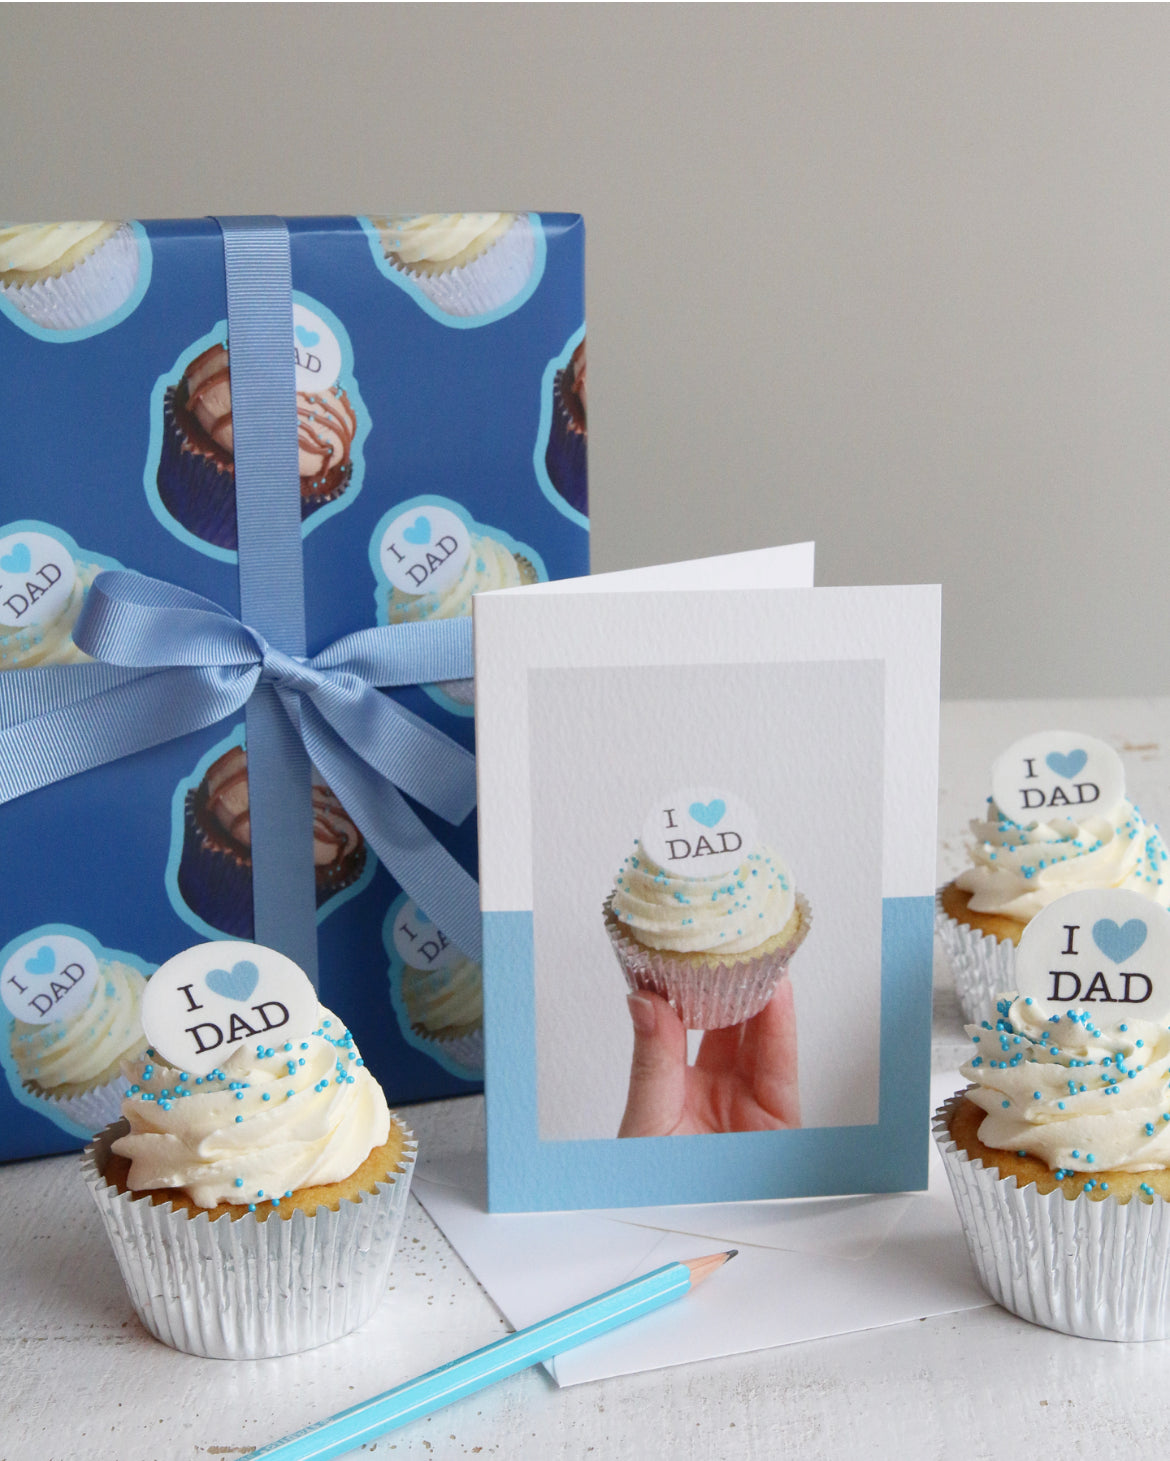 "I Heart Dad" Card, Wrapping Paper & Cupcakes